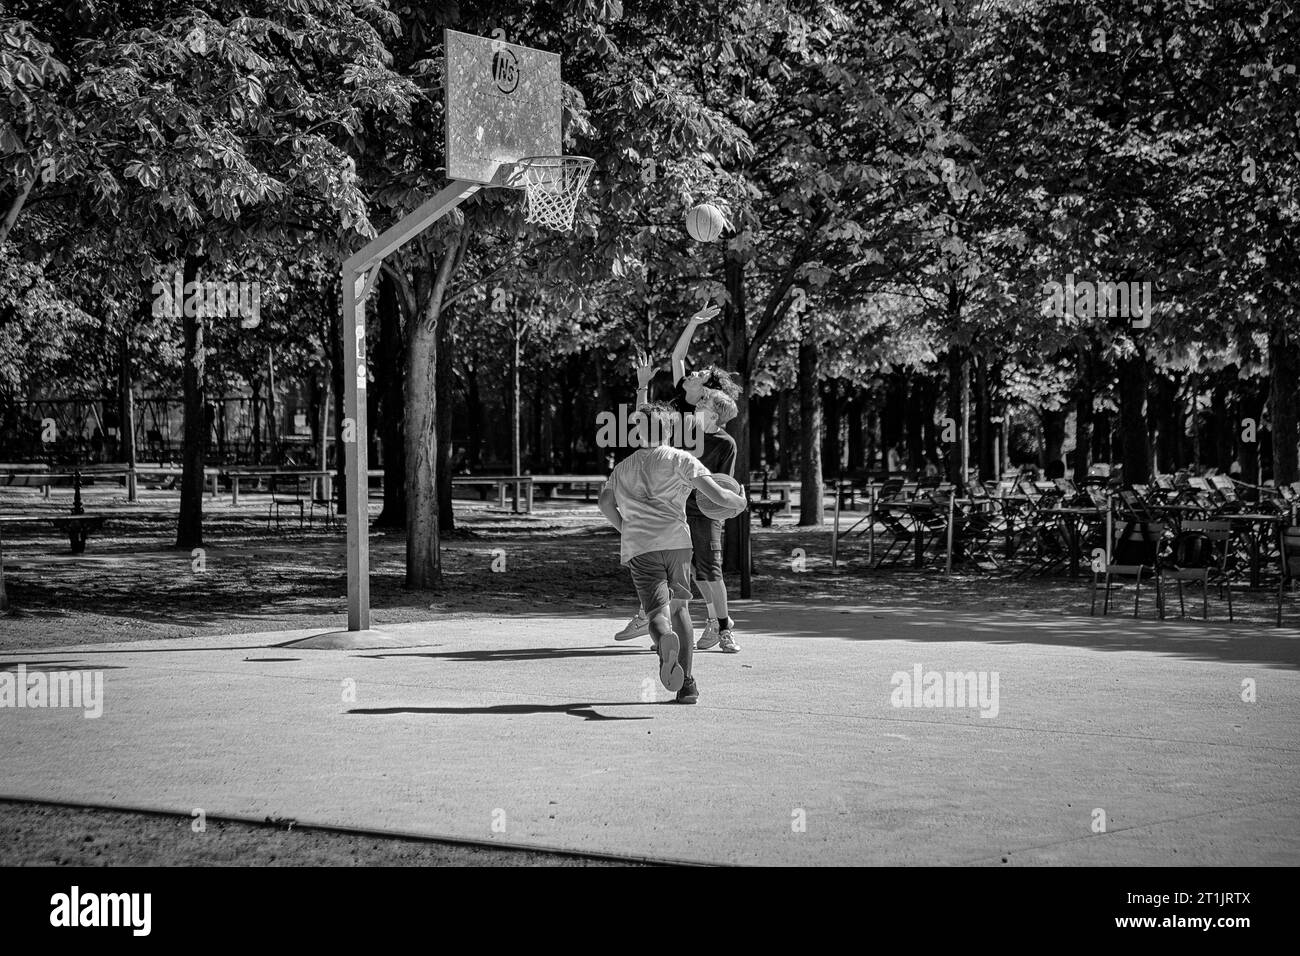 Jardin du luxembourg Black and White Stock Photos & Images - Alamy